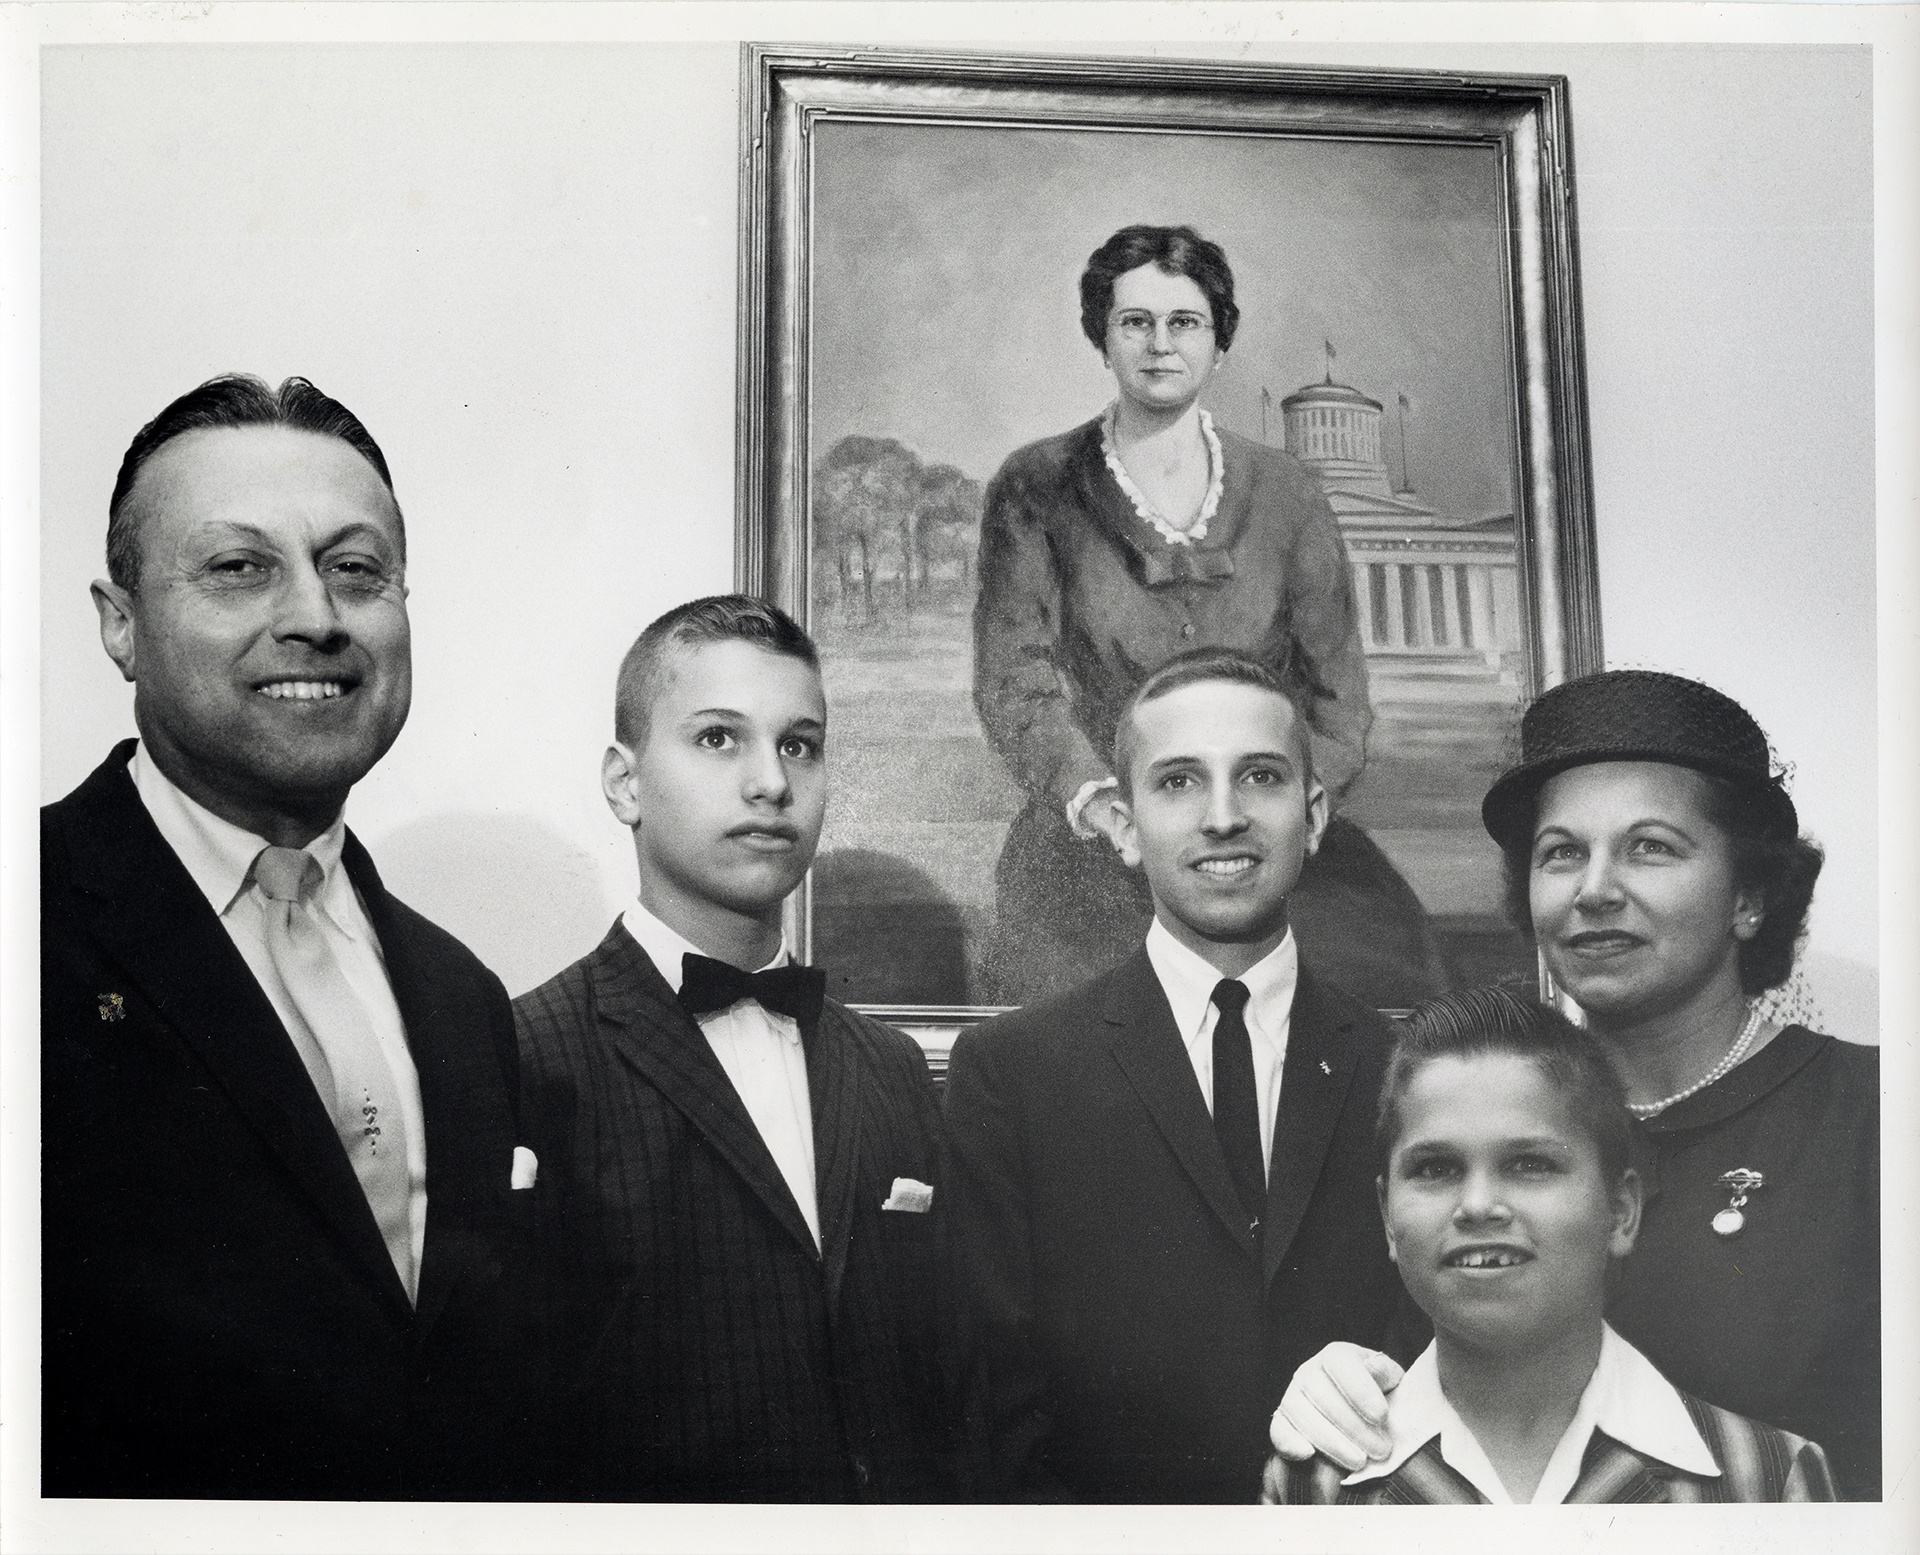 Martin Hanna, son of Myrna Reese Hanna, stands with his family in front of her portrait in June 1960.